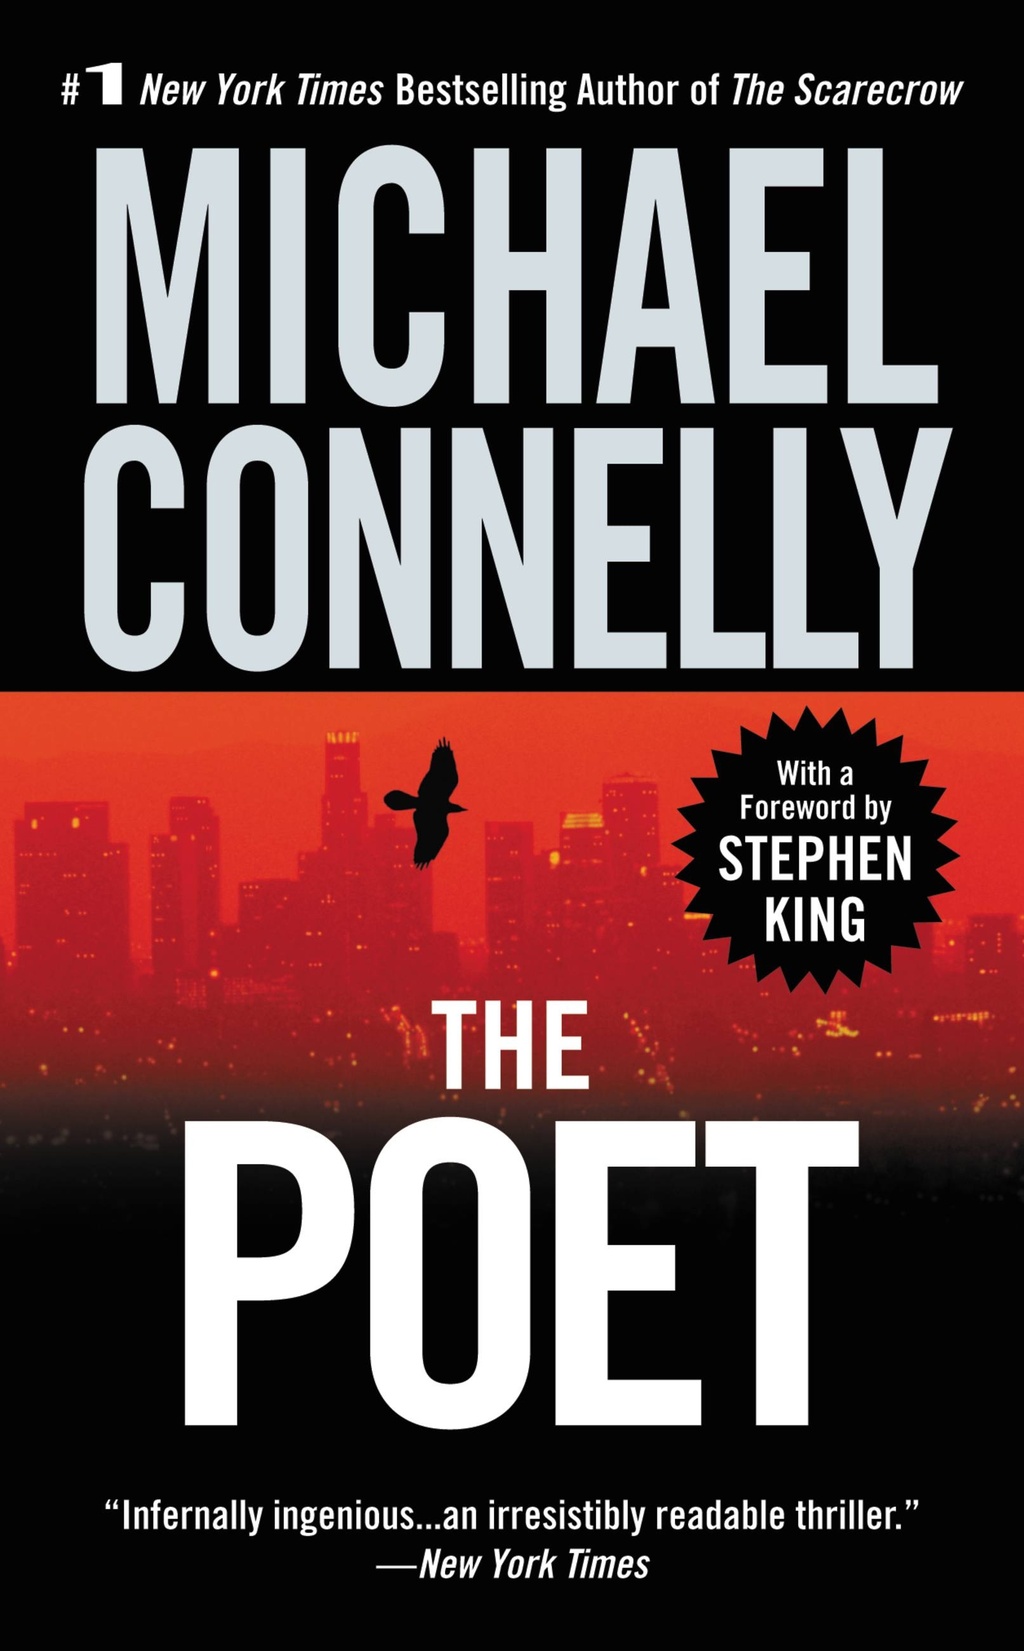 The Poet - MichaelConnelly.com